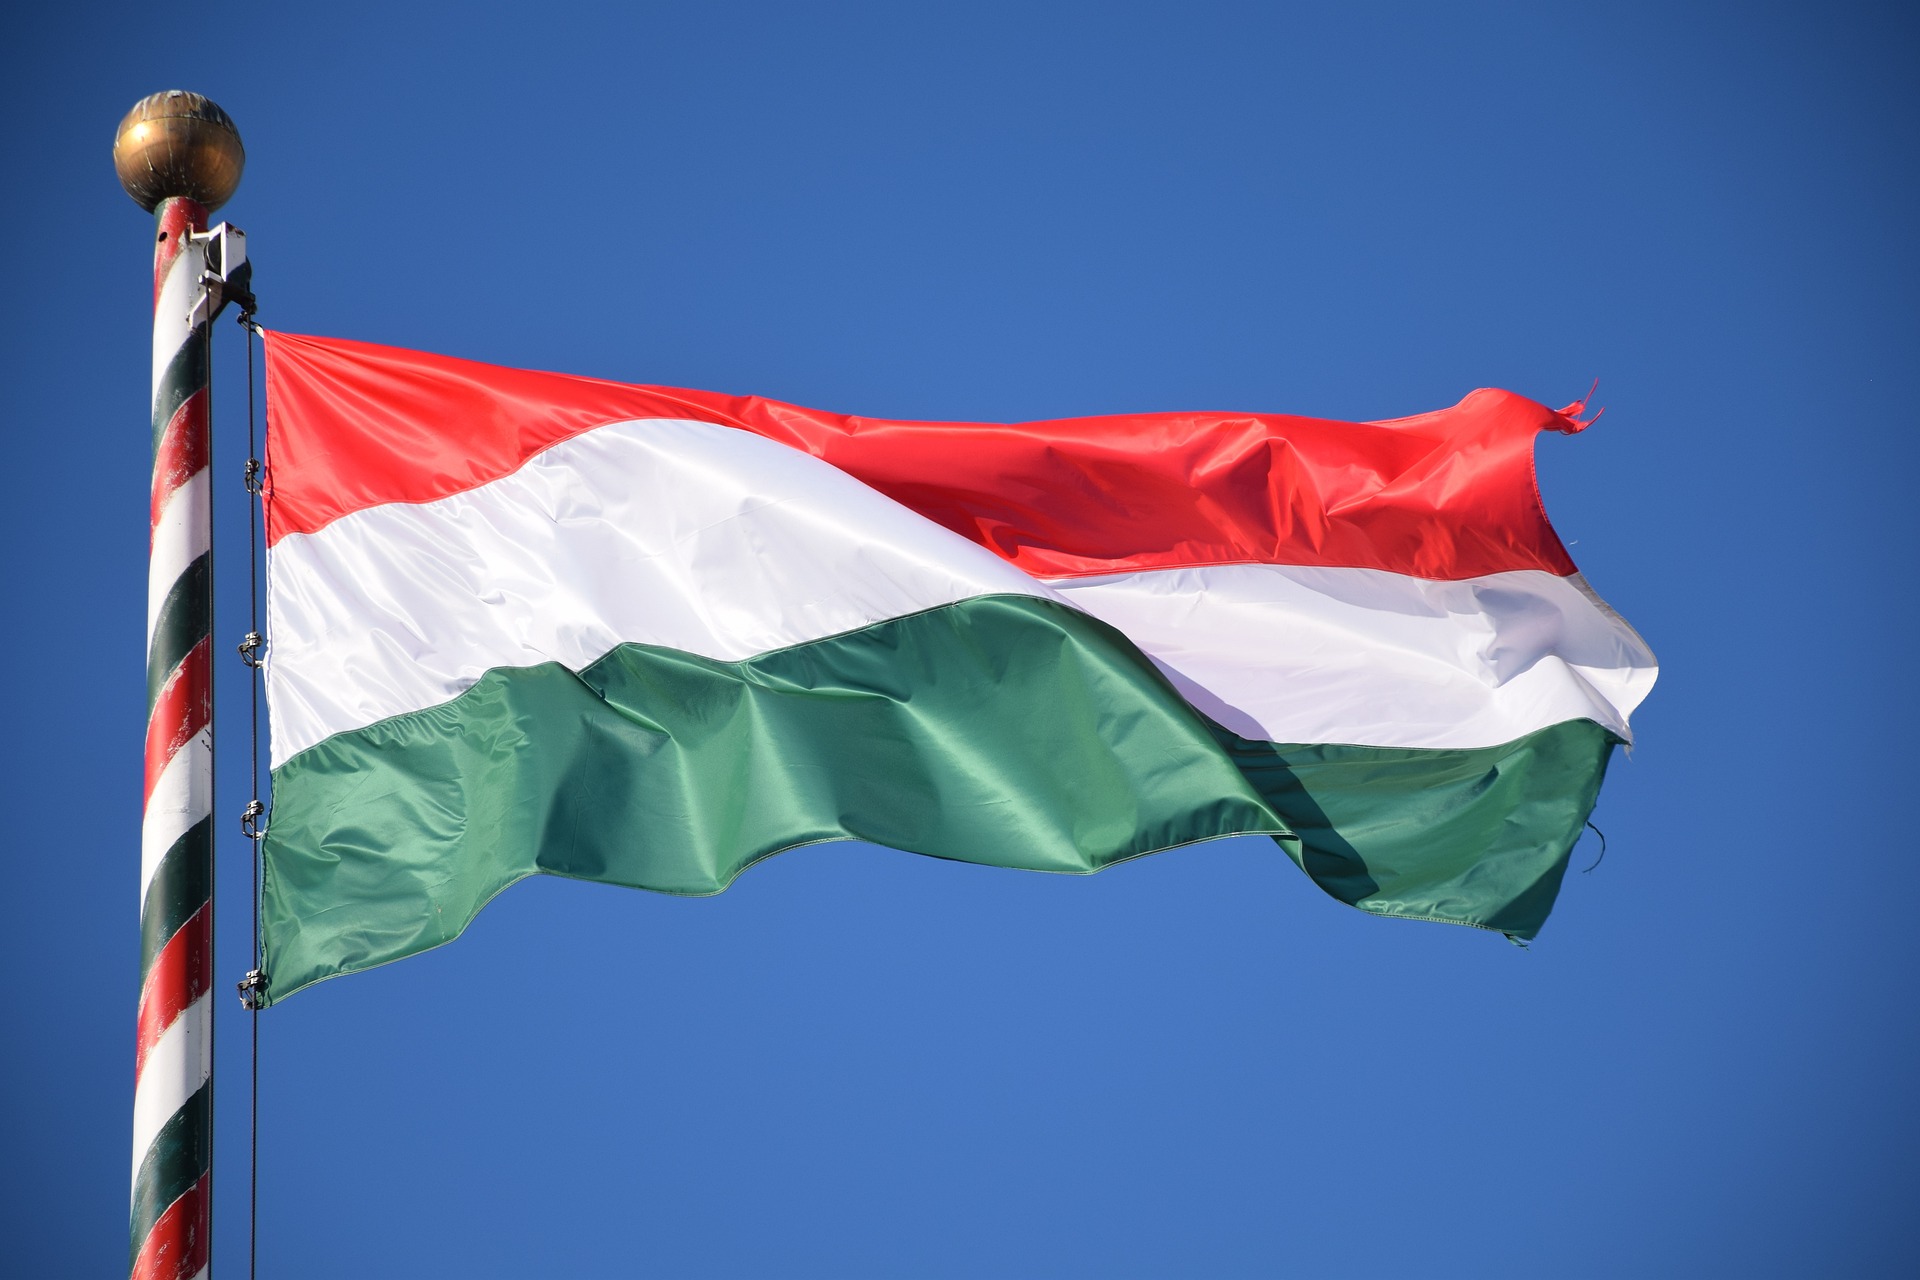 Hungary receives additional frozen funds